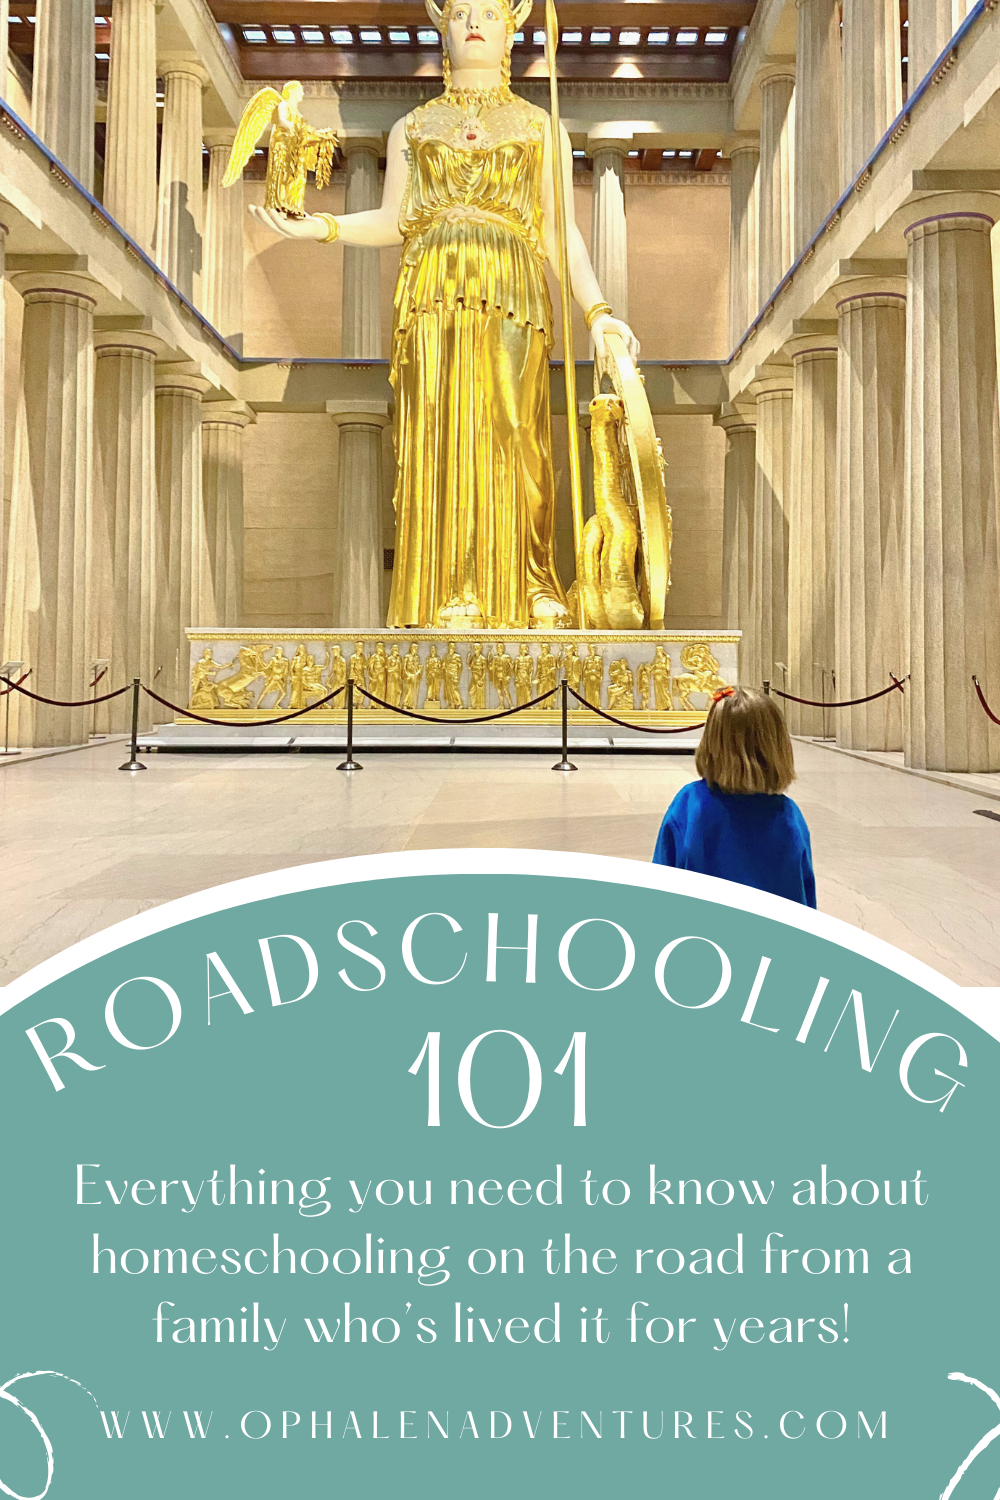 Roadschooling 101, image of a kid looking up at a Greek temple | O'Phalen Adventures